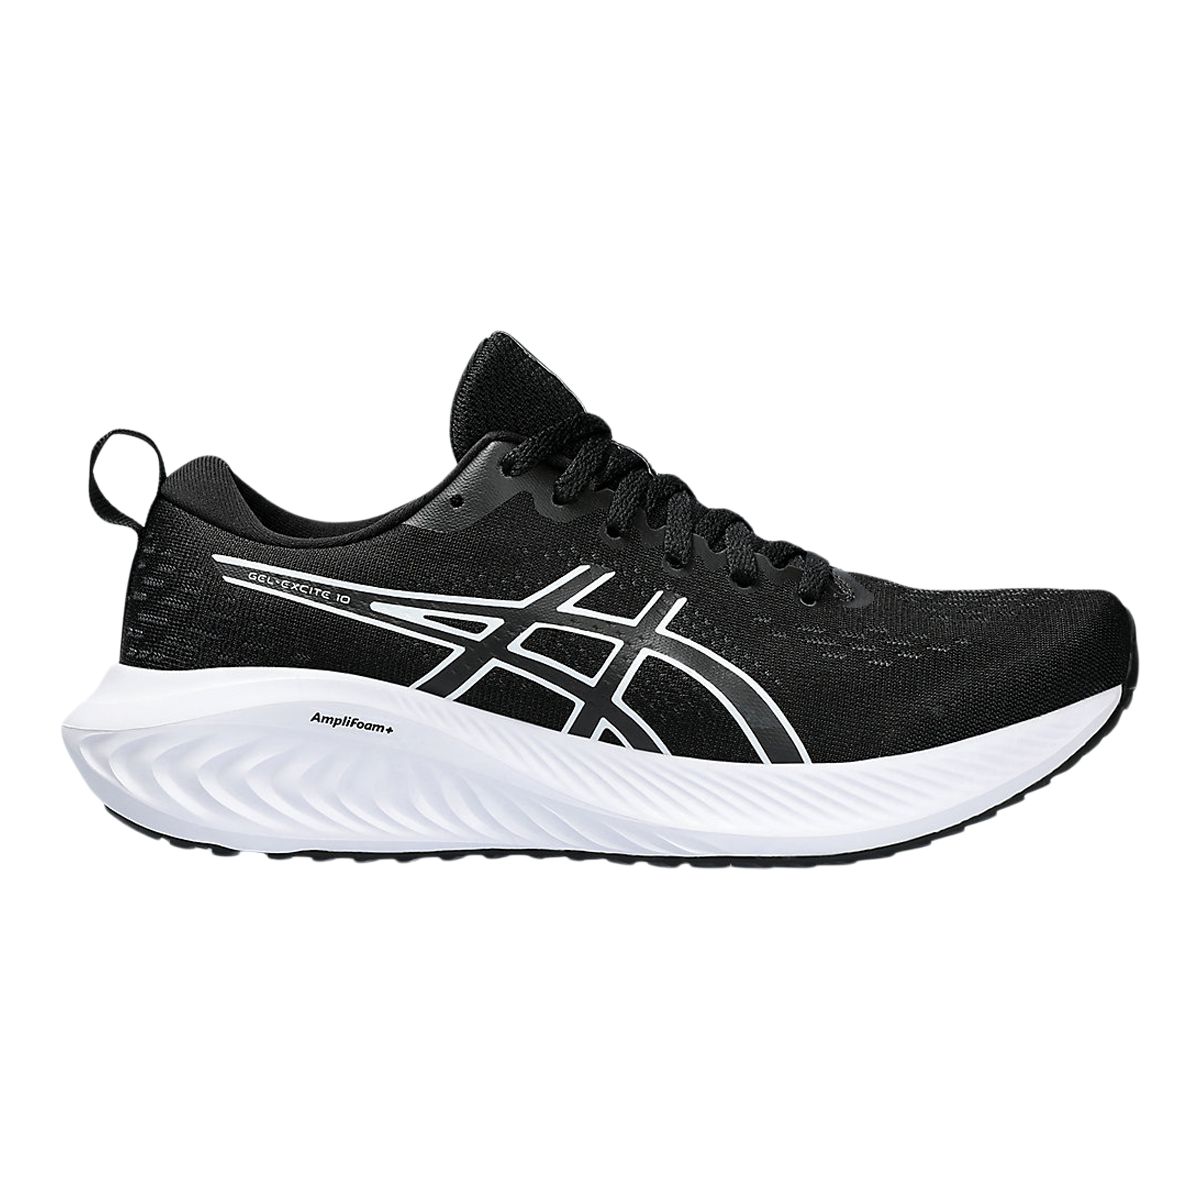 Asics Women's Gel-Excite 10 Wide Running Shoes